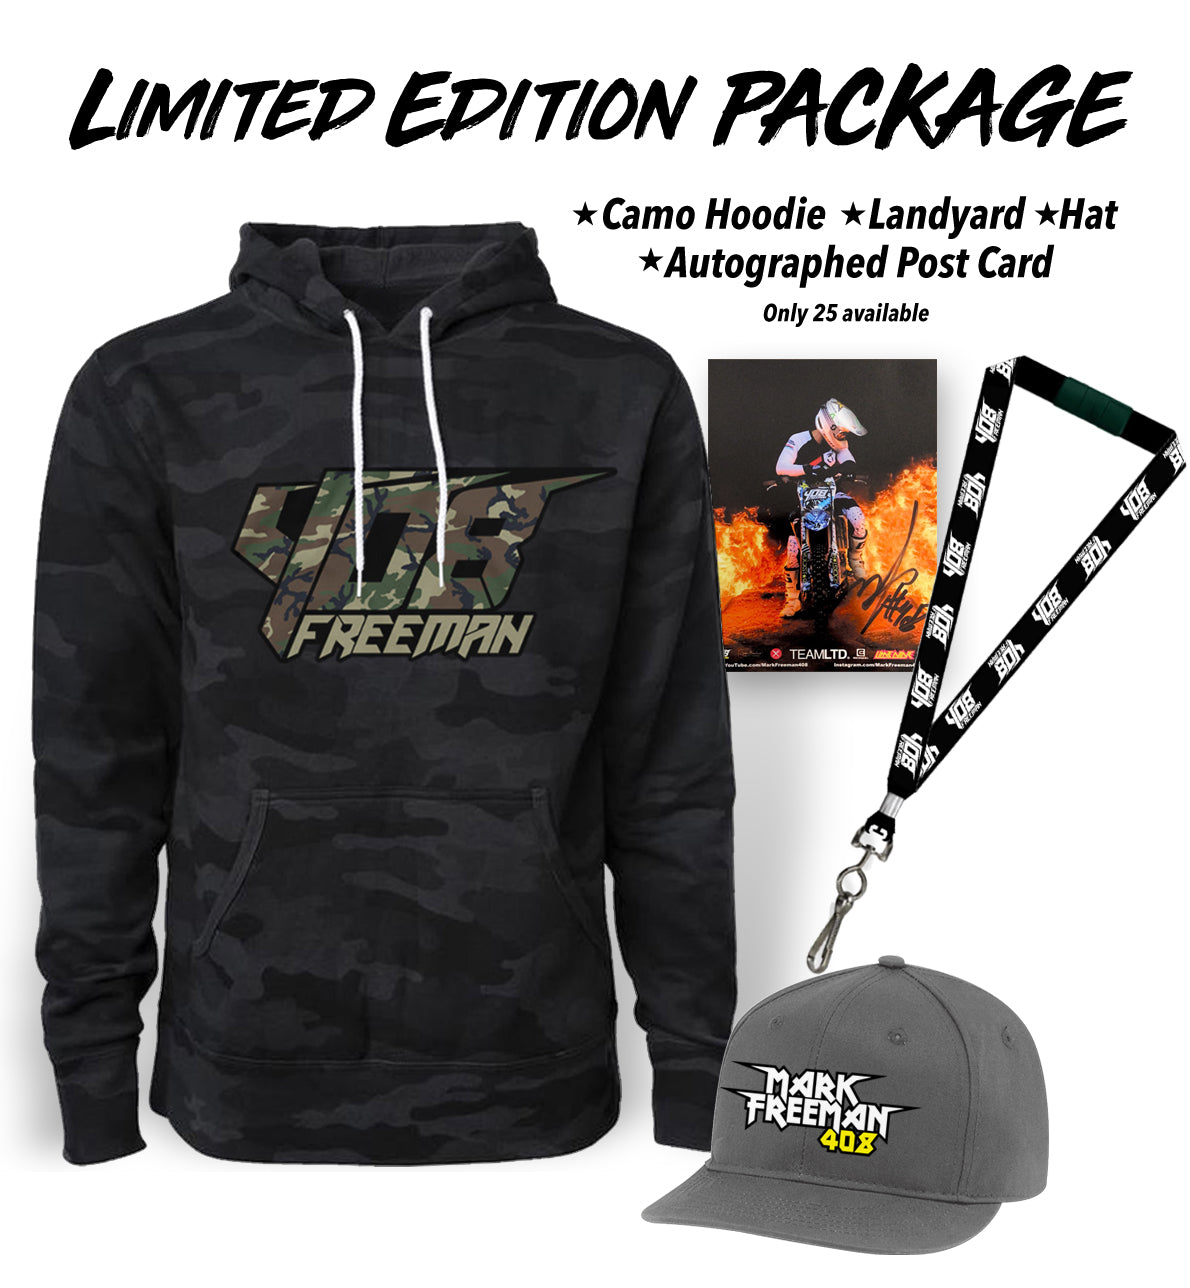 Limited Edition Package